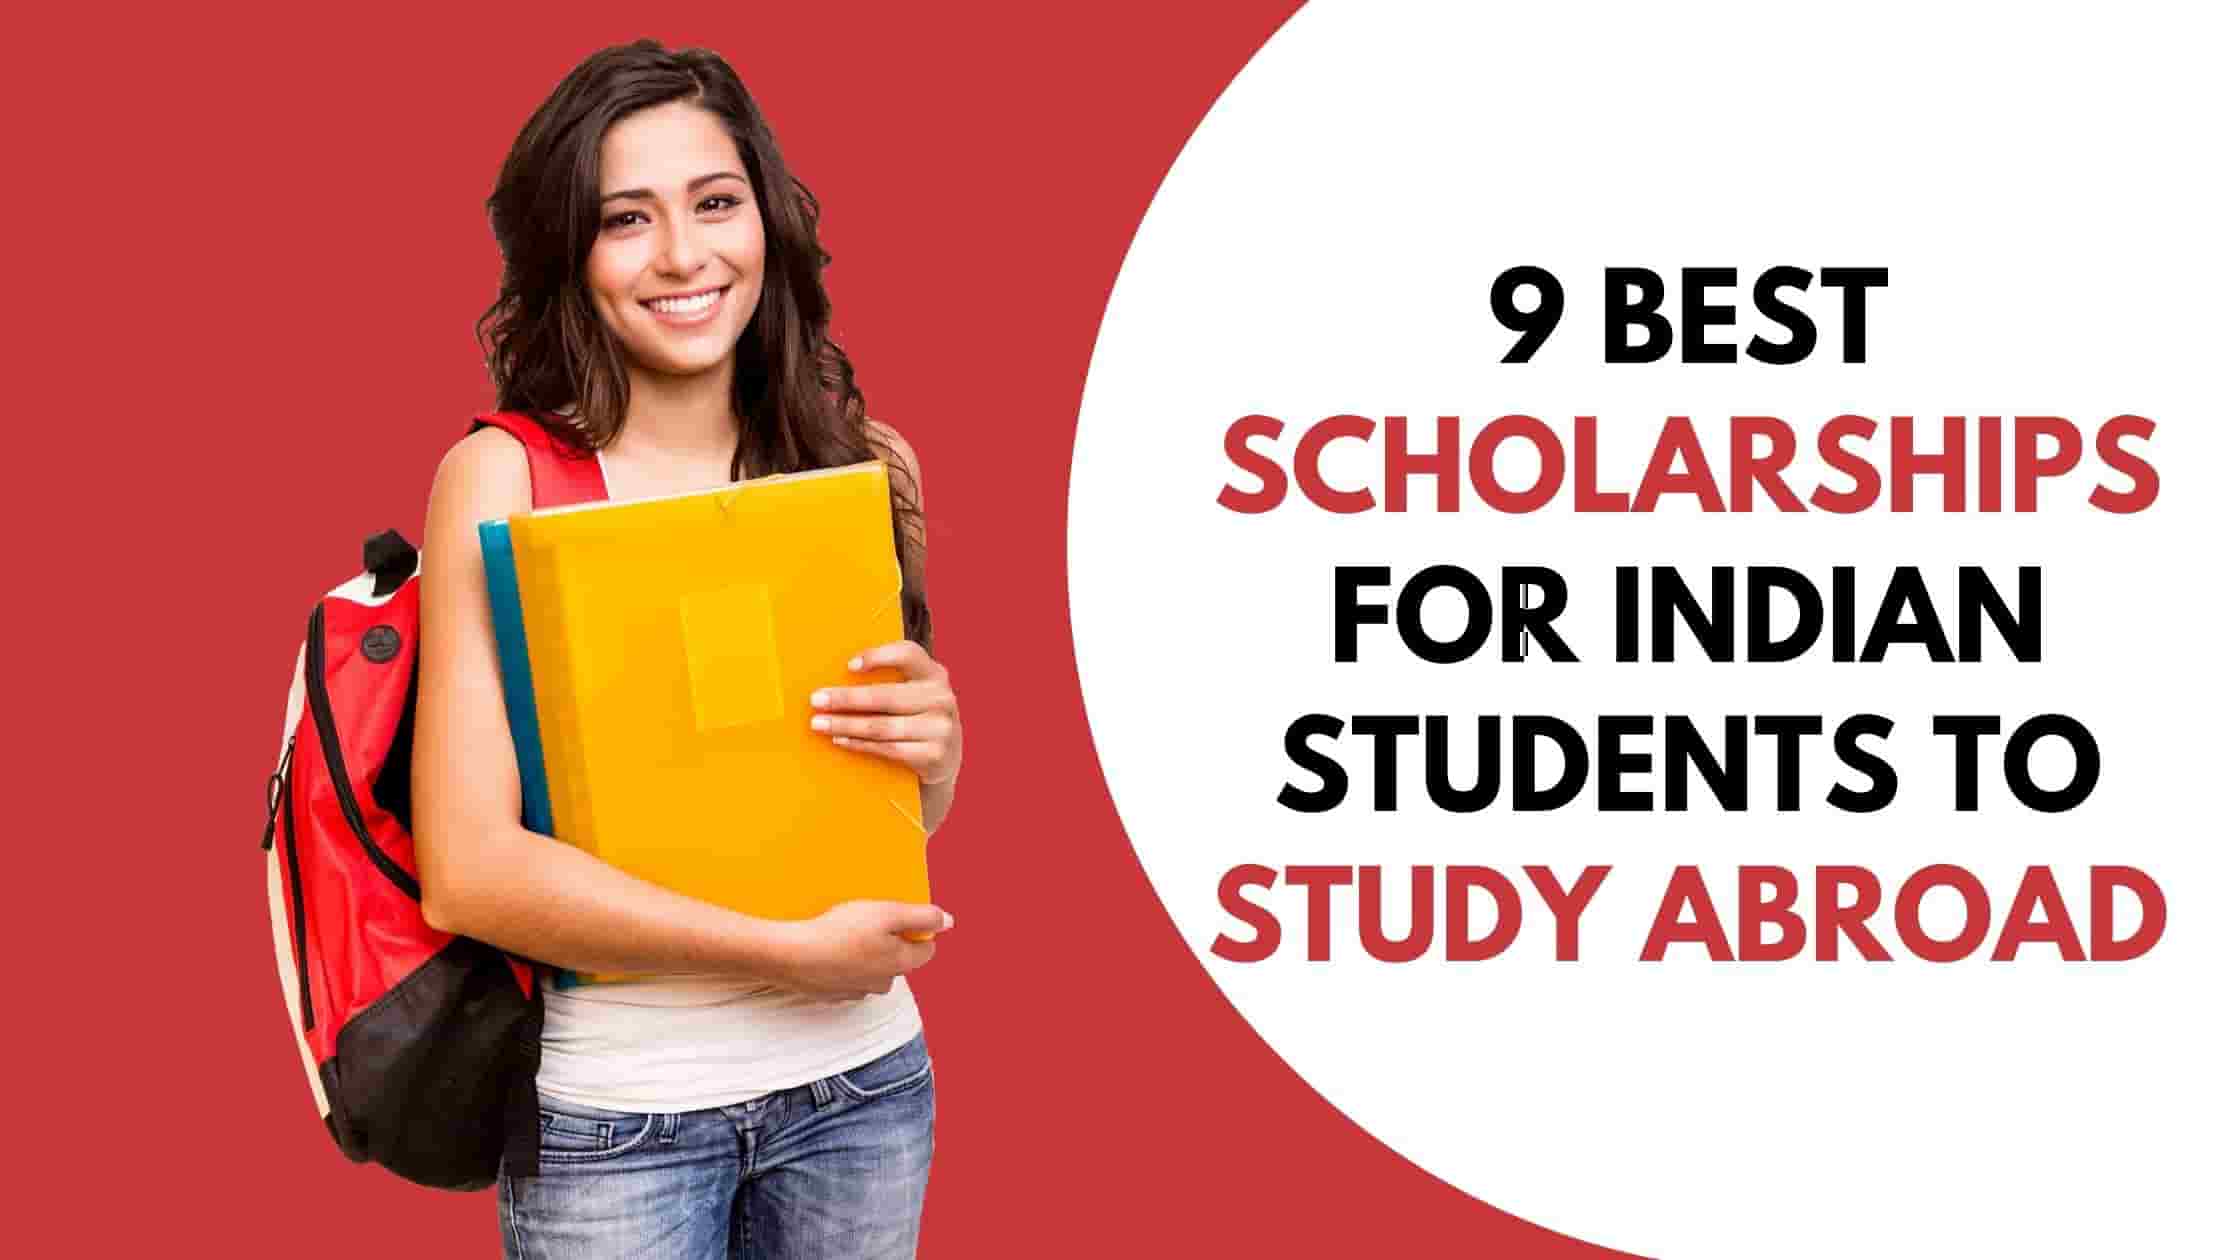 other popular scholarships to study abroad for indian students